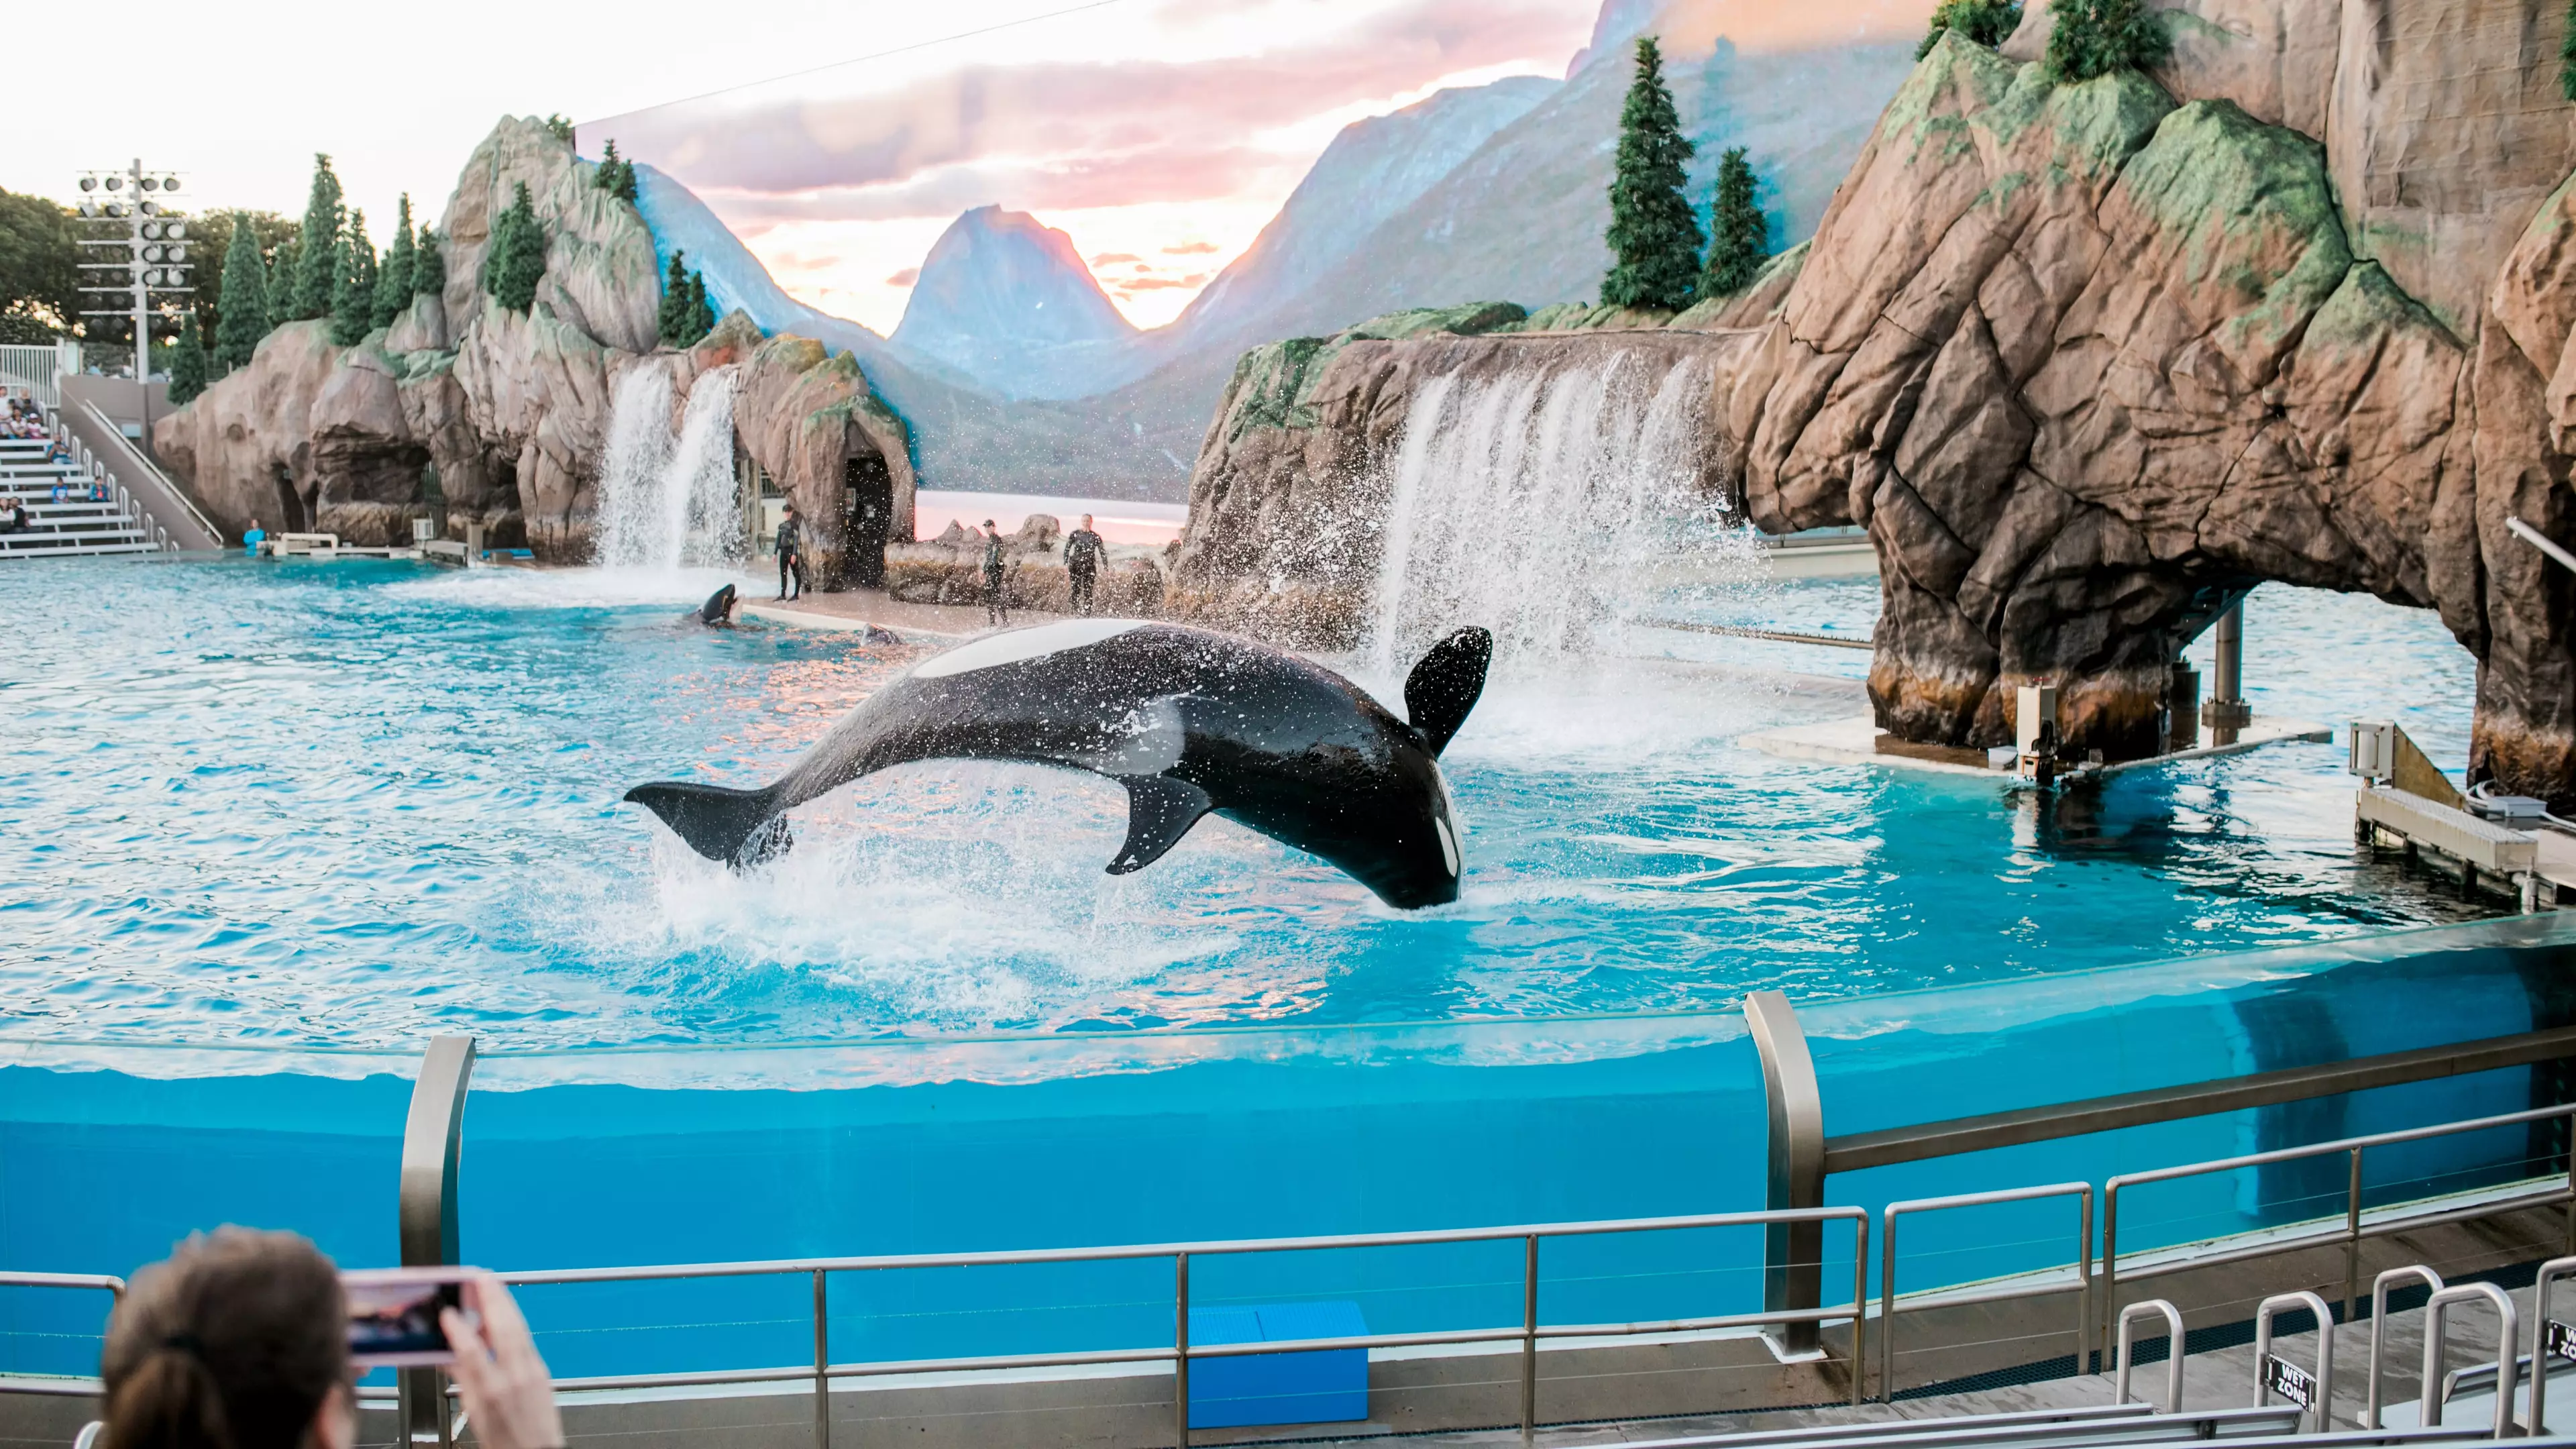 France To Ban Use Of Wild Animals In Circuses, Orca In Marine Parks And Mink Farming